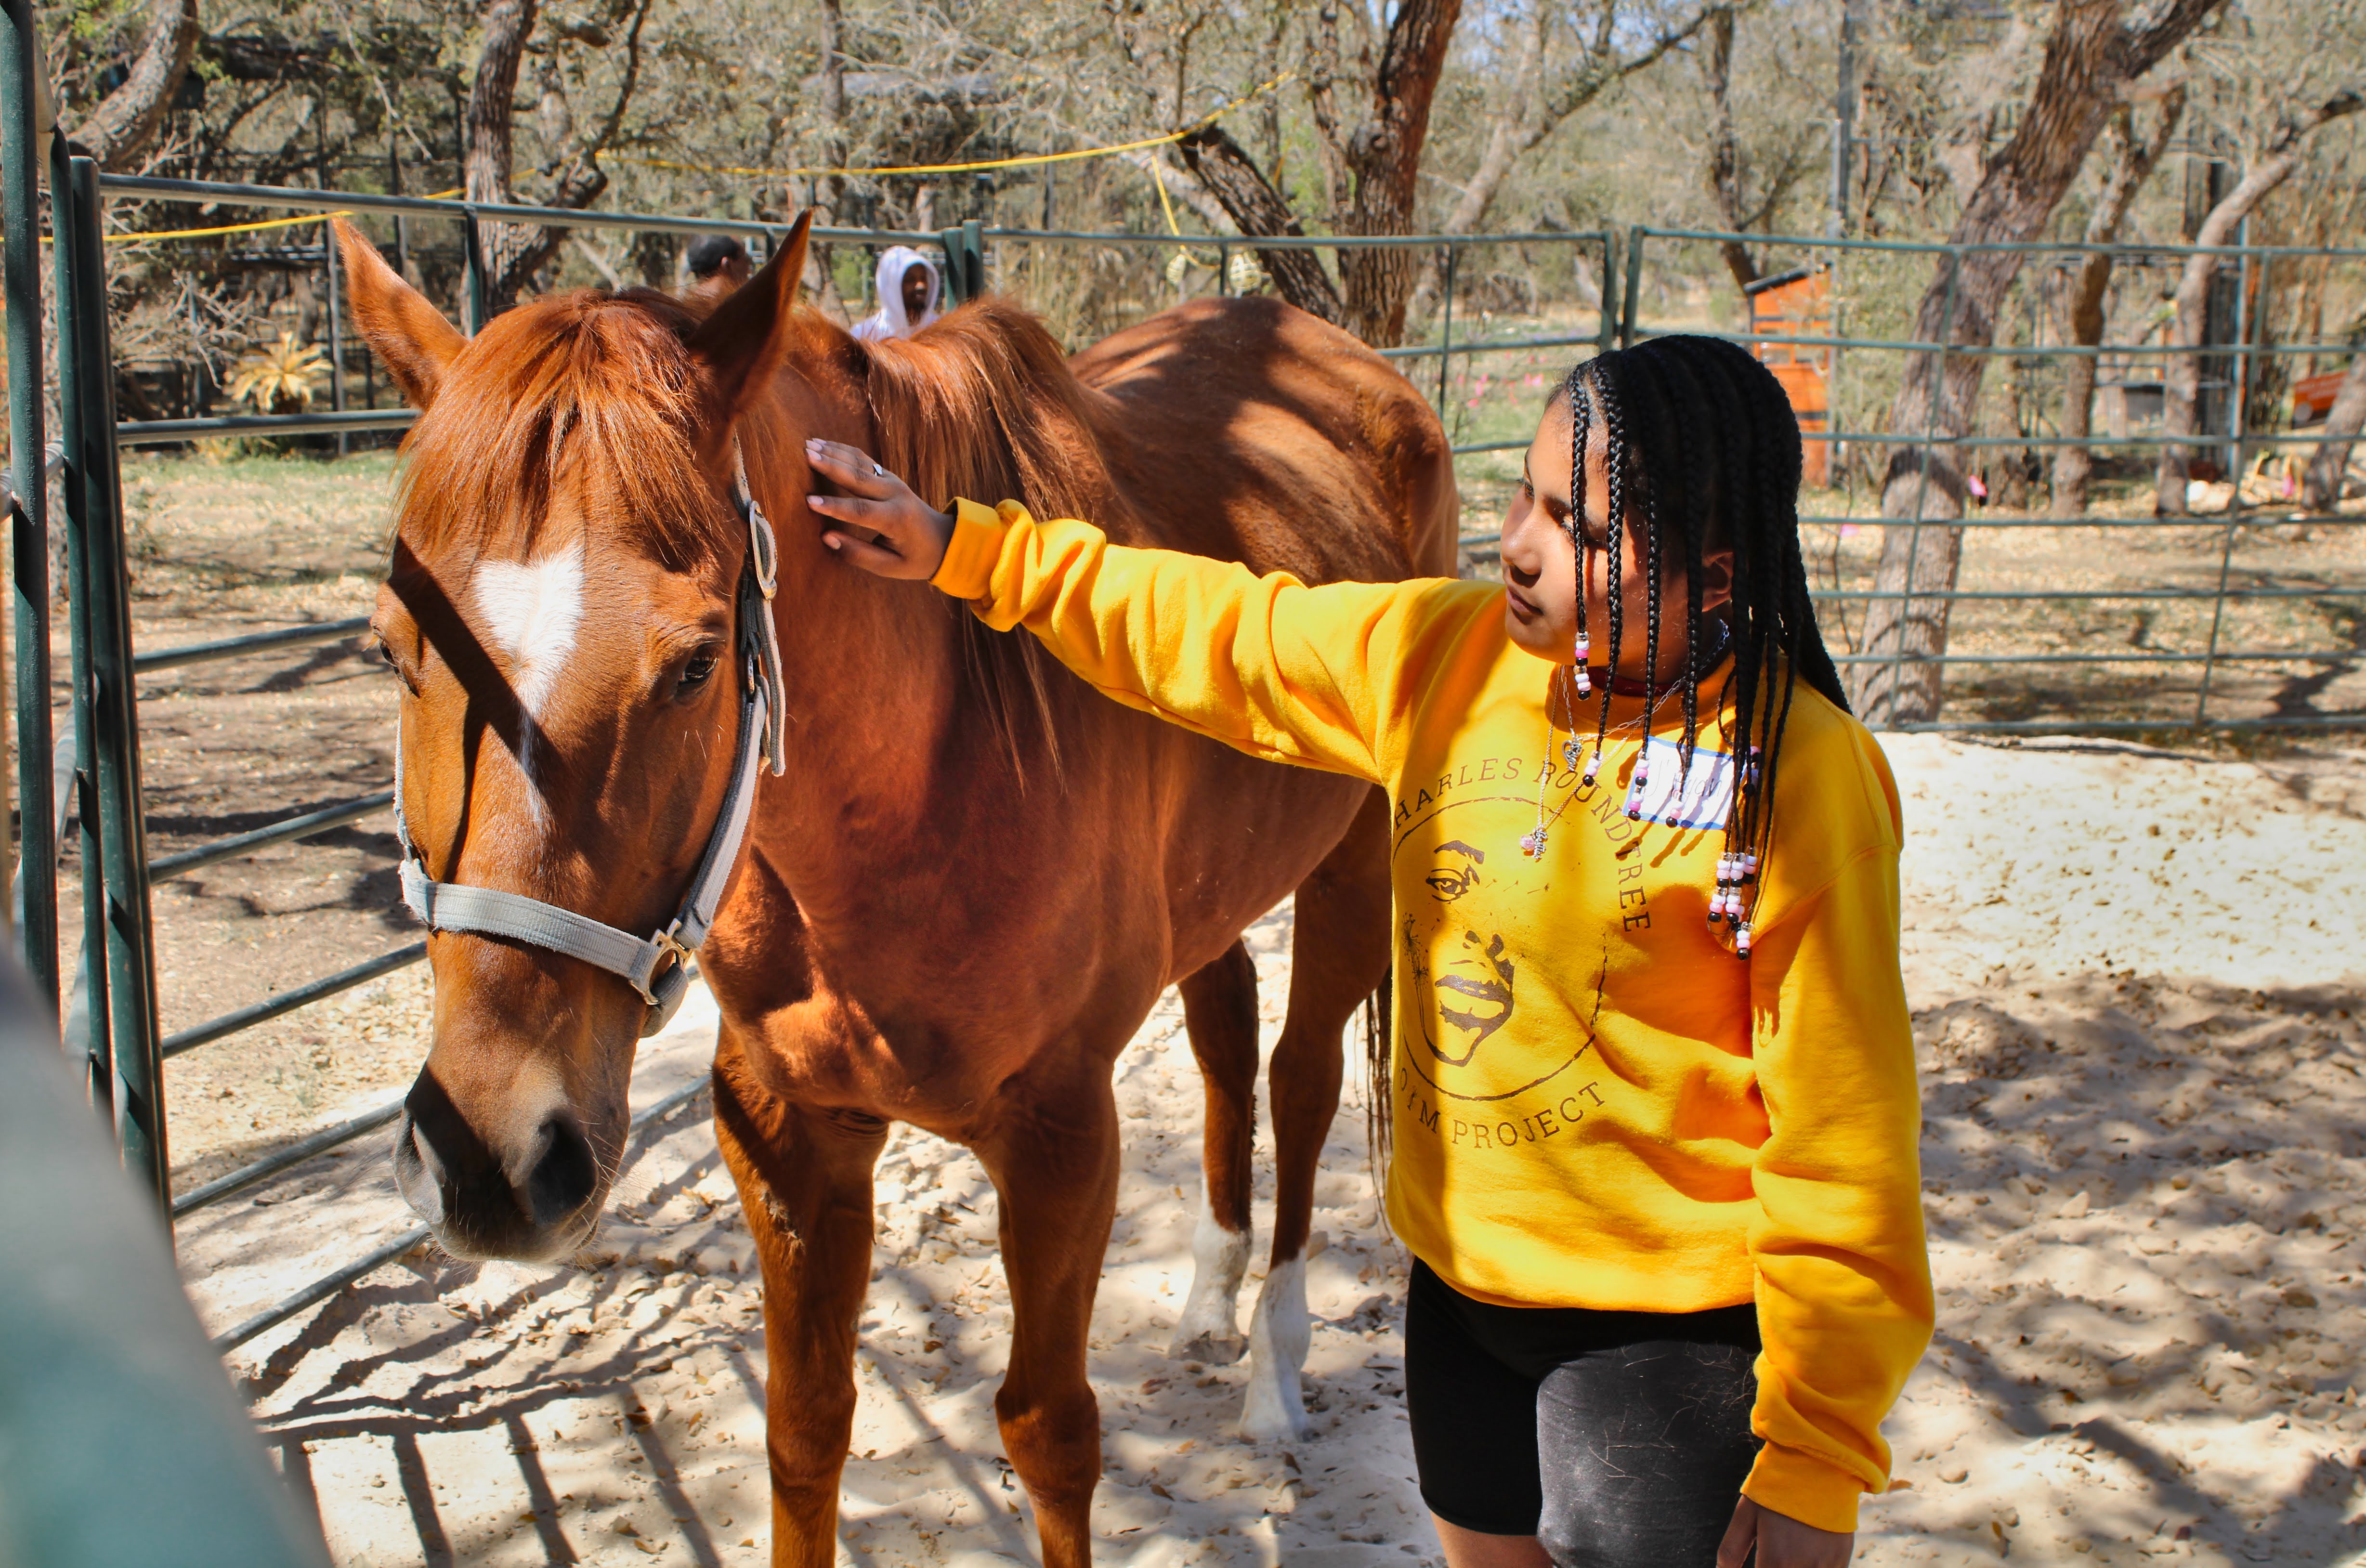 A young person pets a horse in an outdoor pen